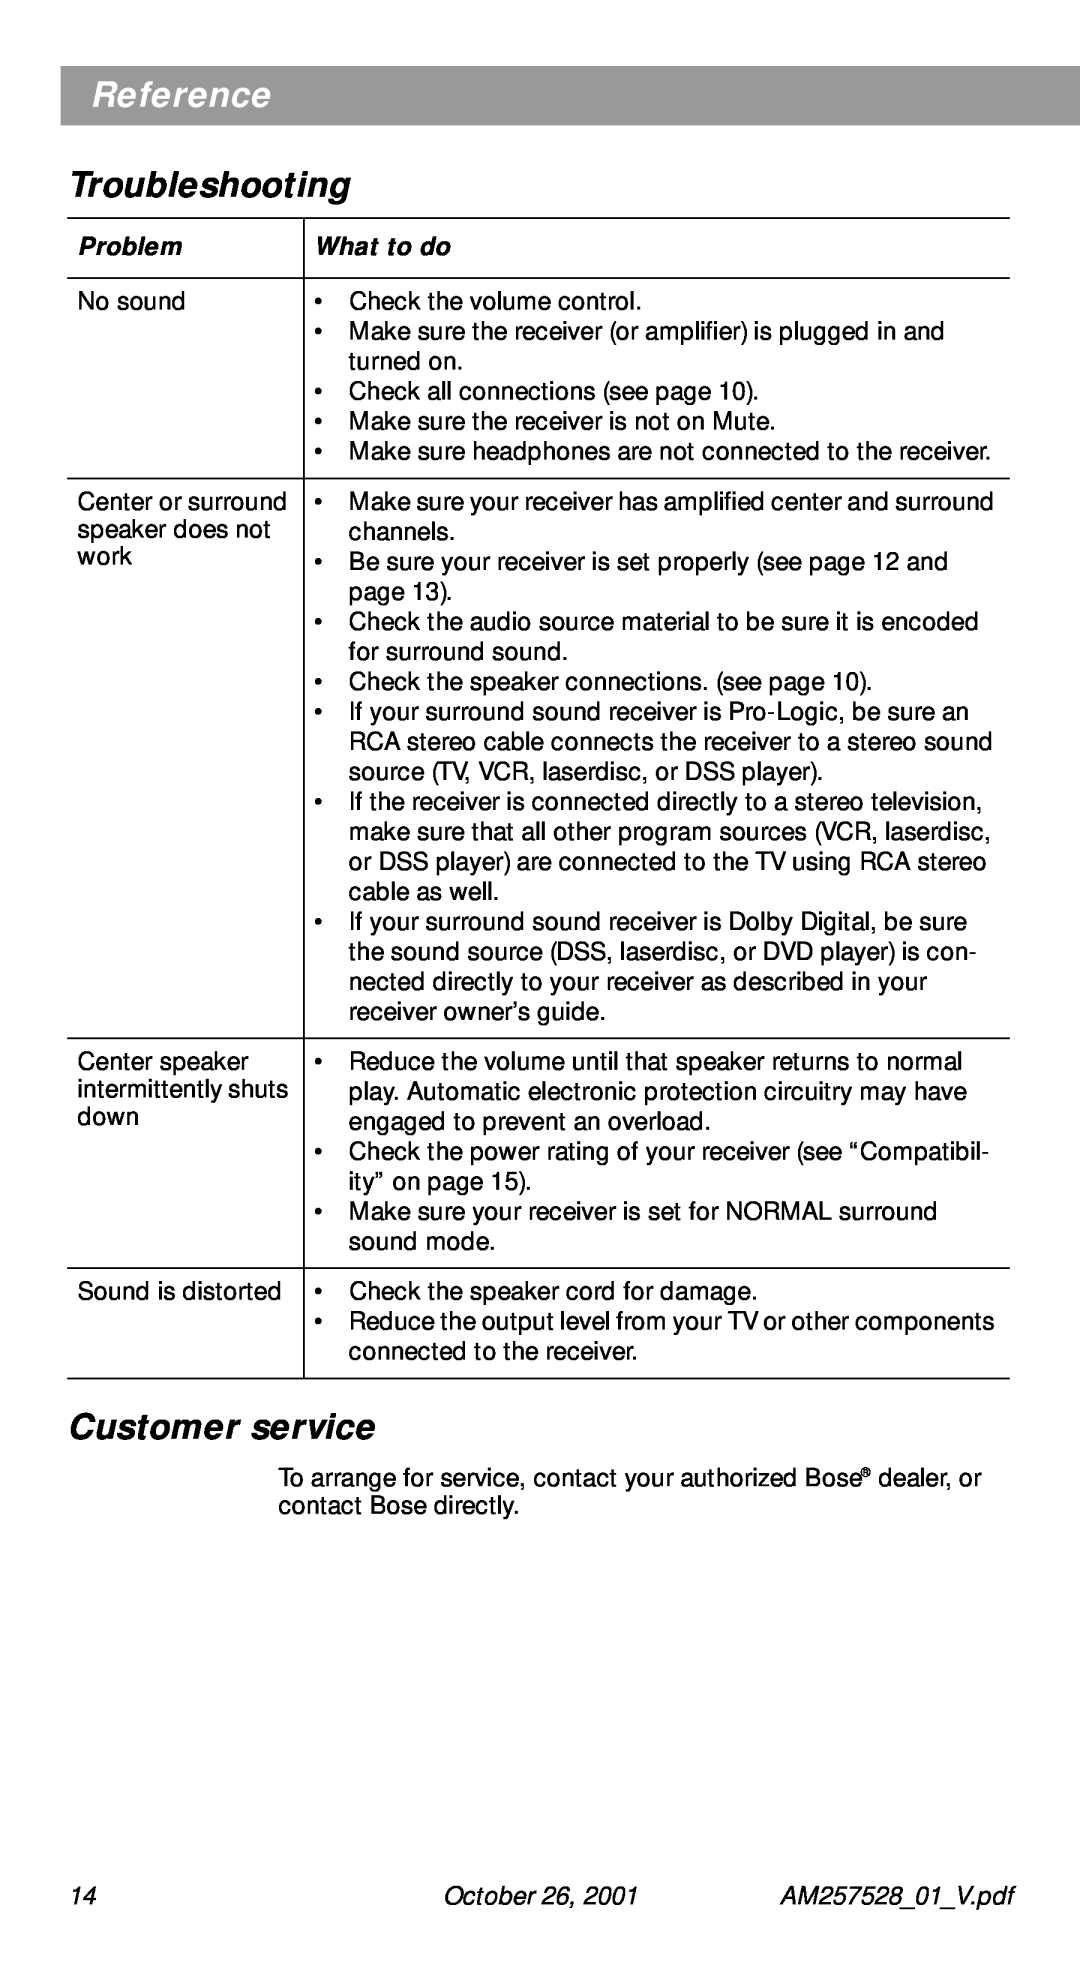 Bose 30 Series II manual Reference, Troubleshooting, Customer service, Problem, What to do, October 